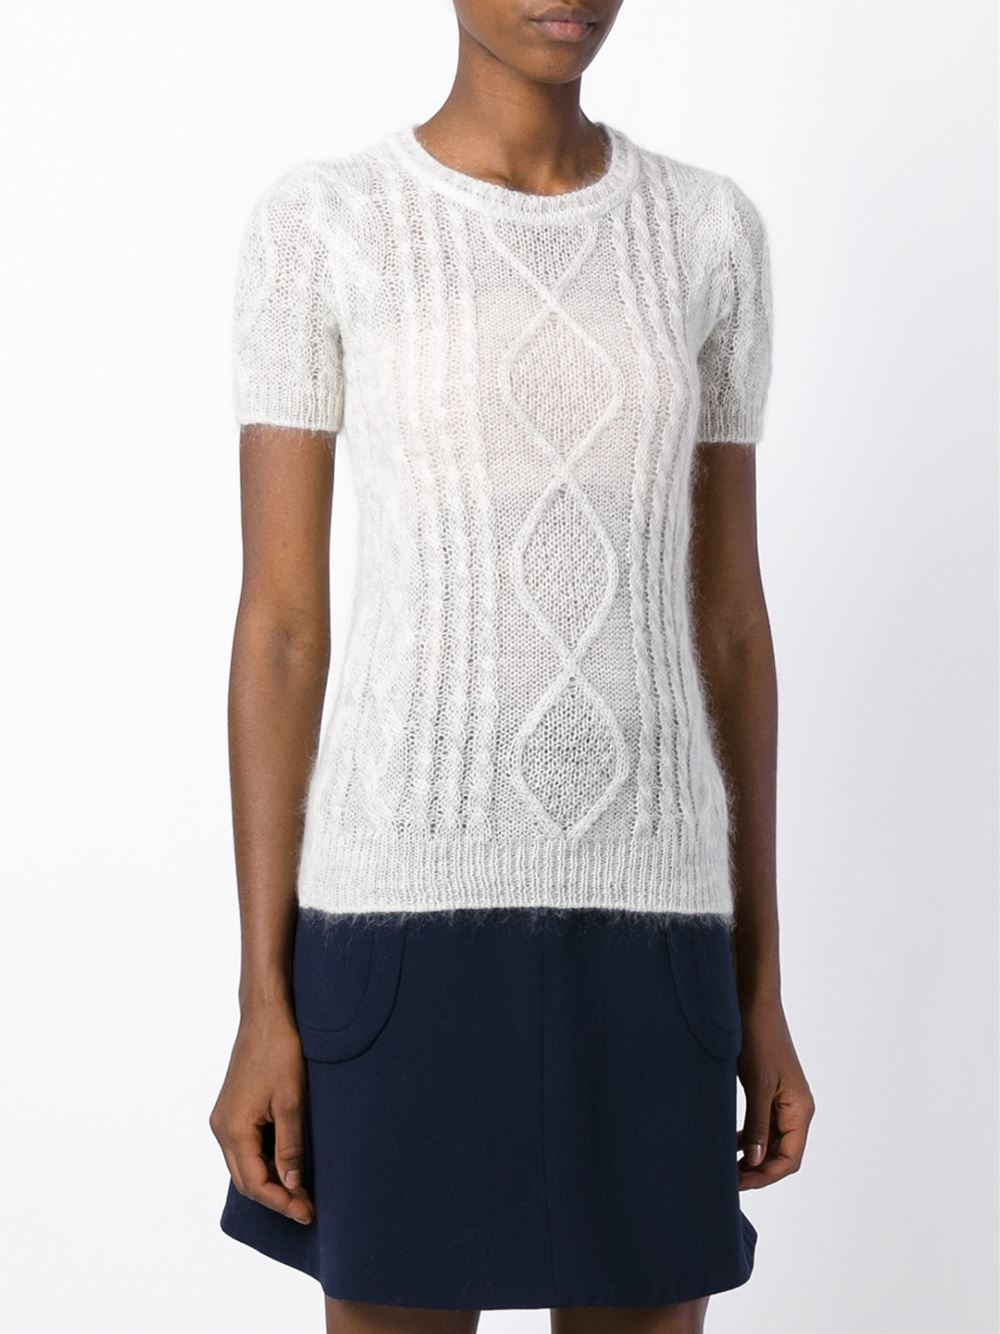 Ermanno scervino Short Sleeve Cable Knit Sweater in Beige (NUDE ...